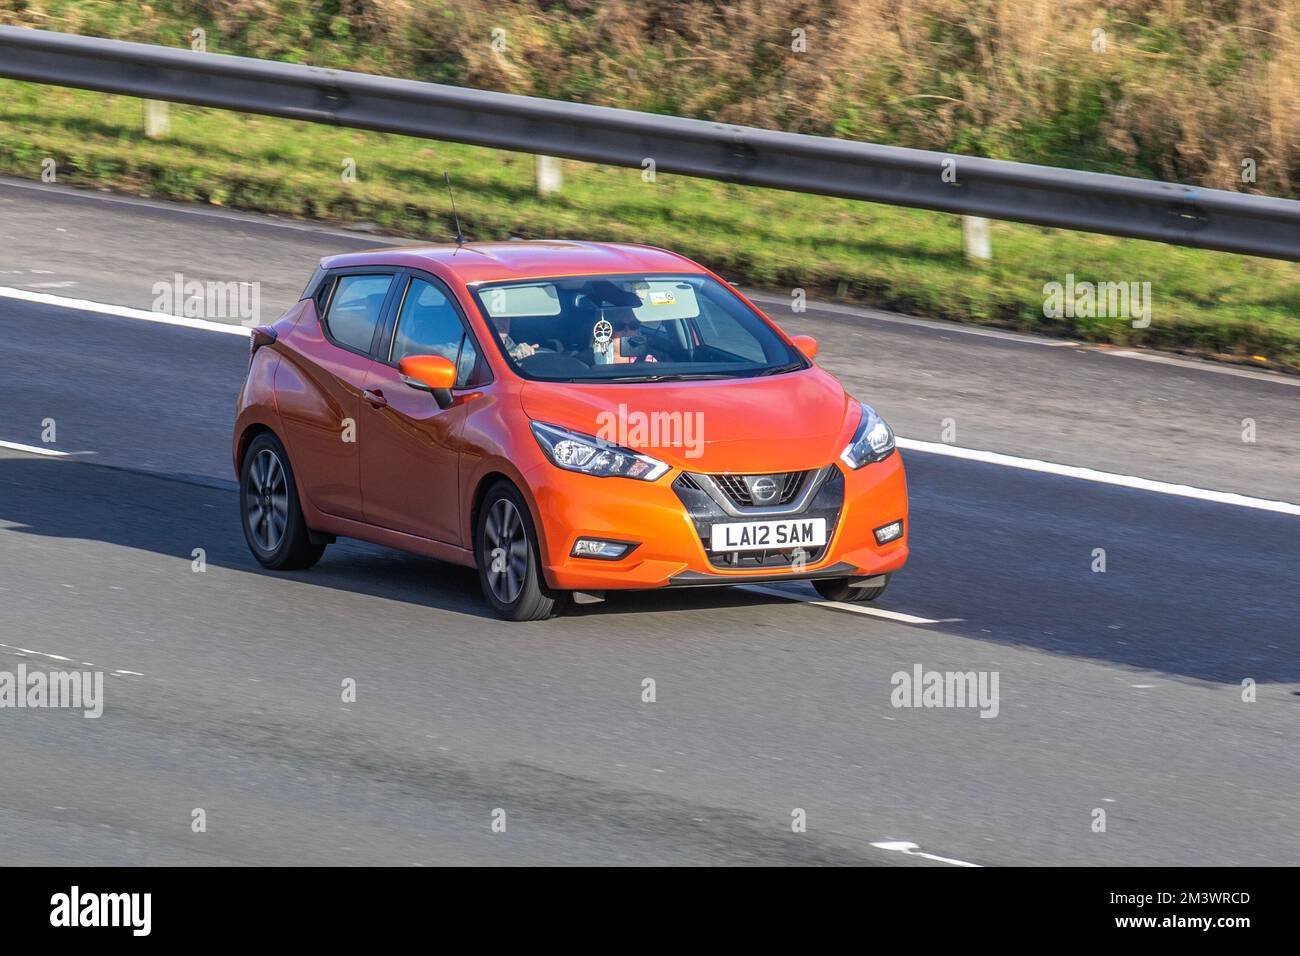 2018 Orange NISSAN MICRA IG-T ACENTA LIMITED EDITION 898cc 5 speed manual; travelling on the M6 motorway, UK Stock Photo